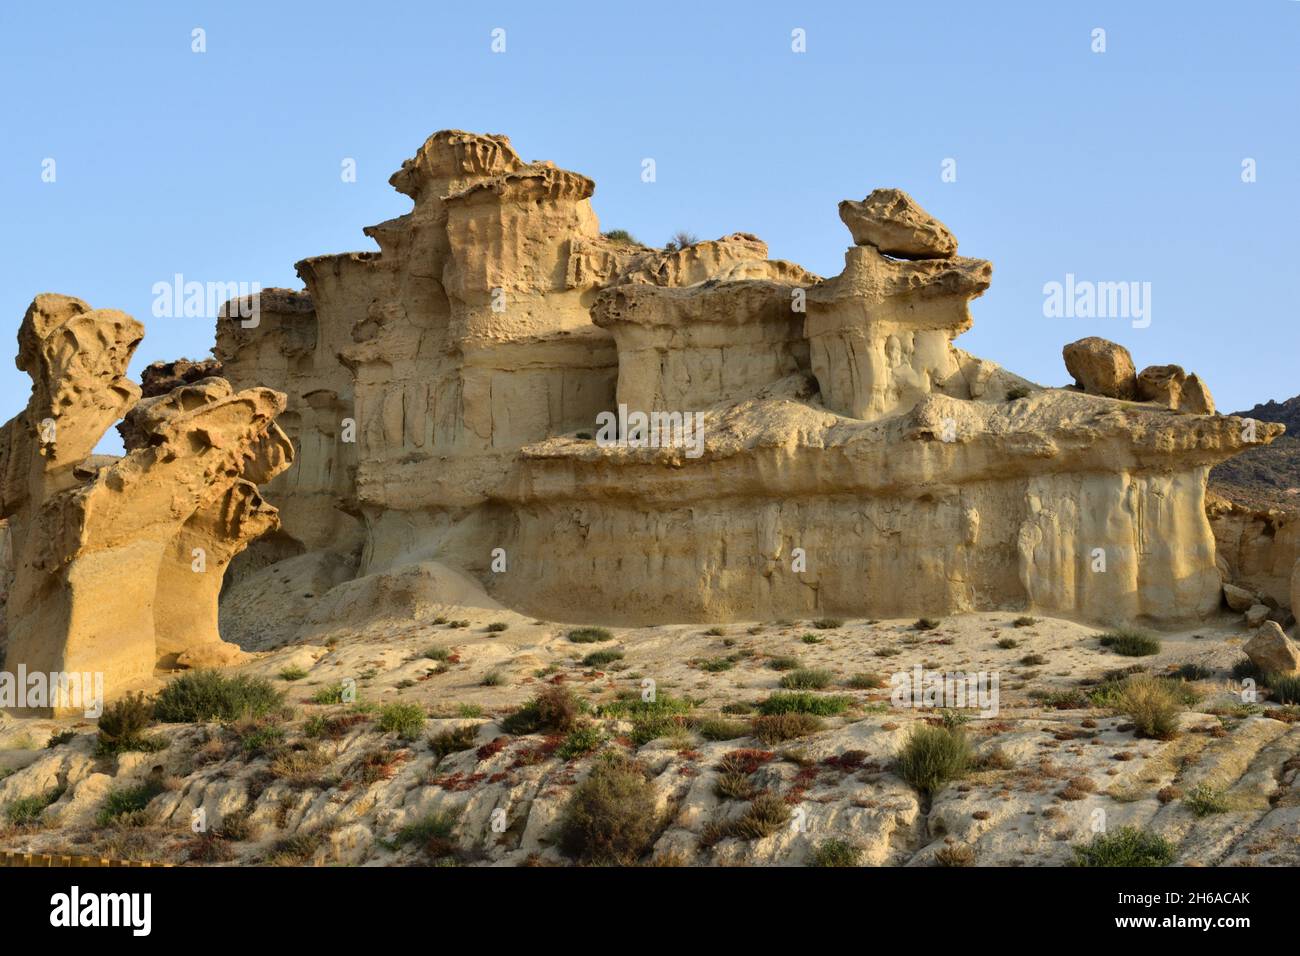 Gredas de Bolnuevo, Murcia, Spain . An ancient marine cliff eroded into strange shapesby the action of waves, wind and water. Stock Photo